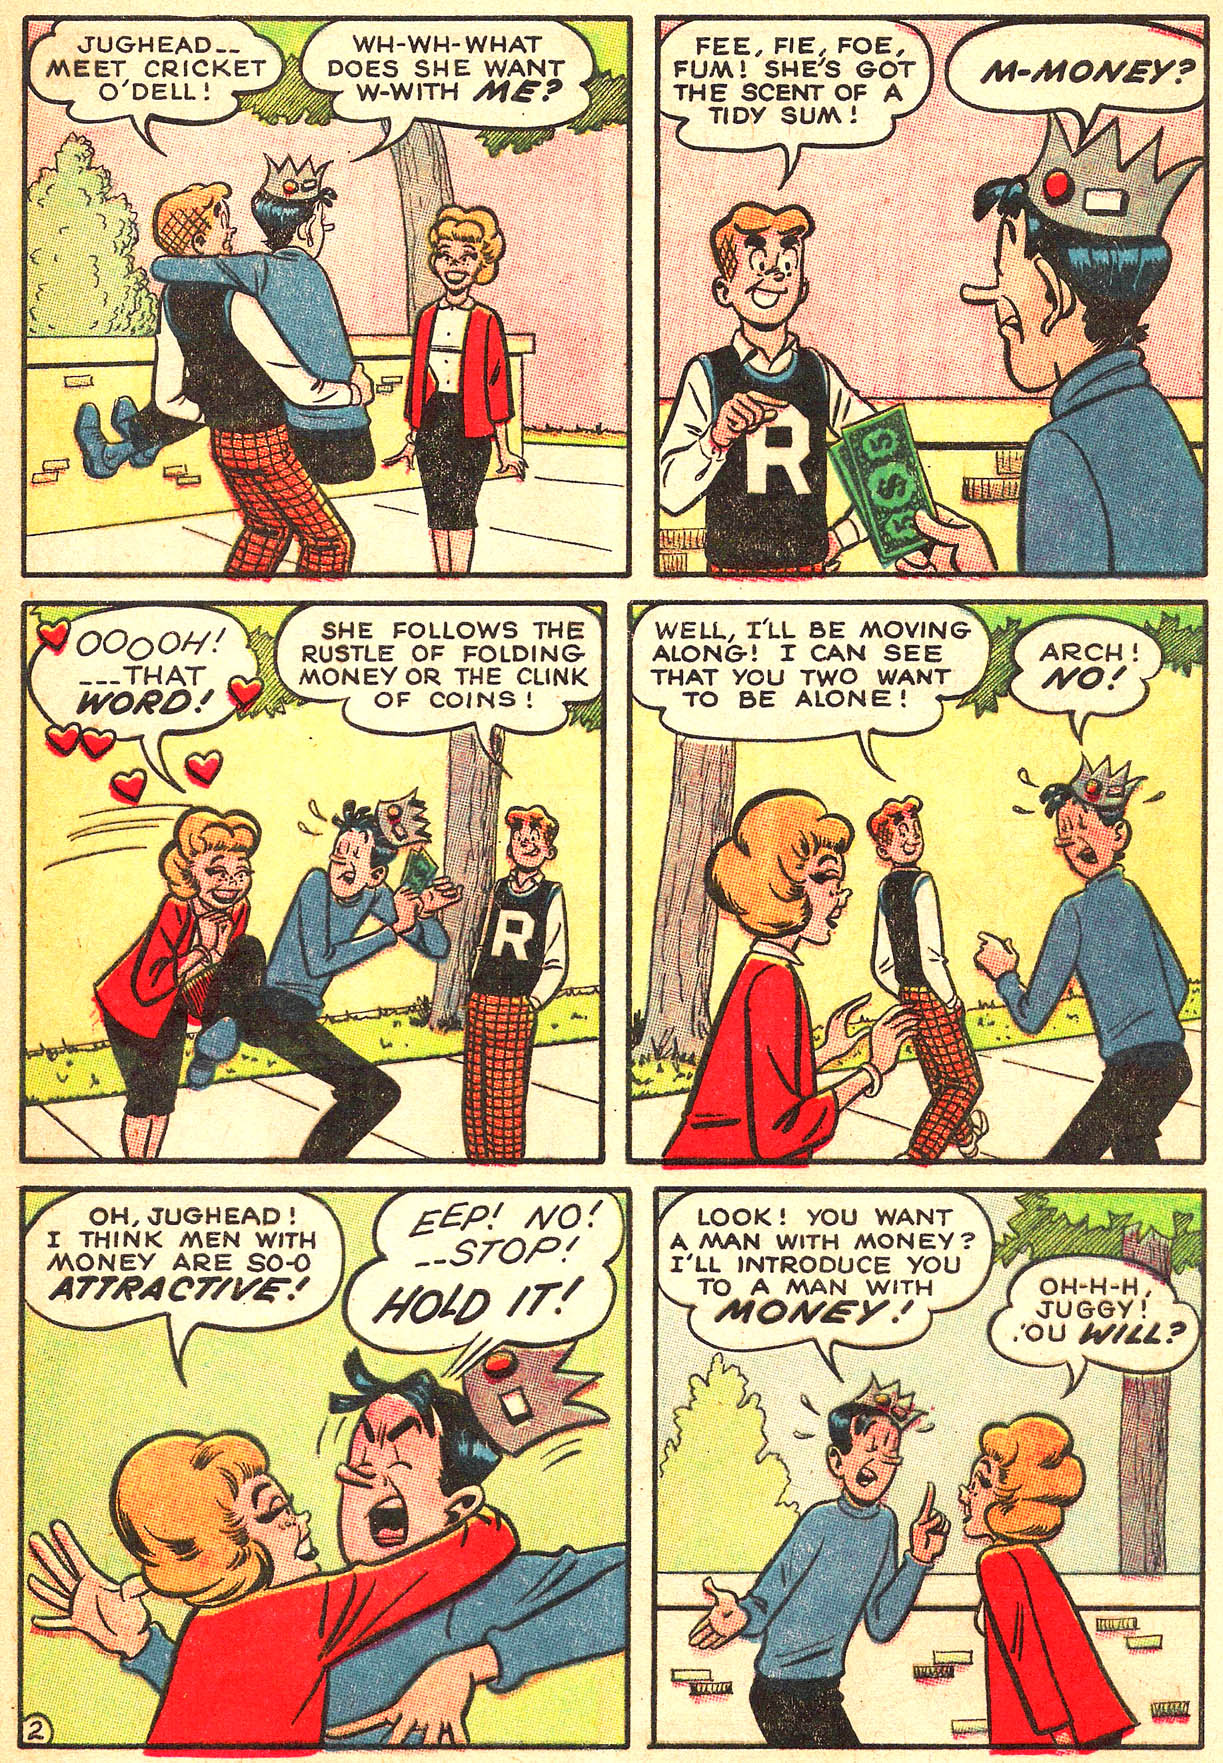 Archie (1960) 133 Page 21